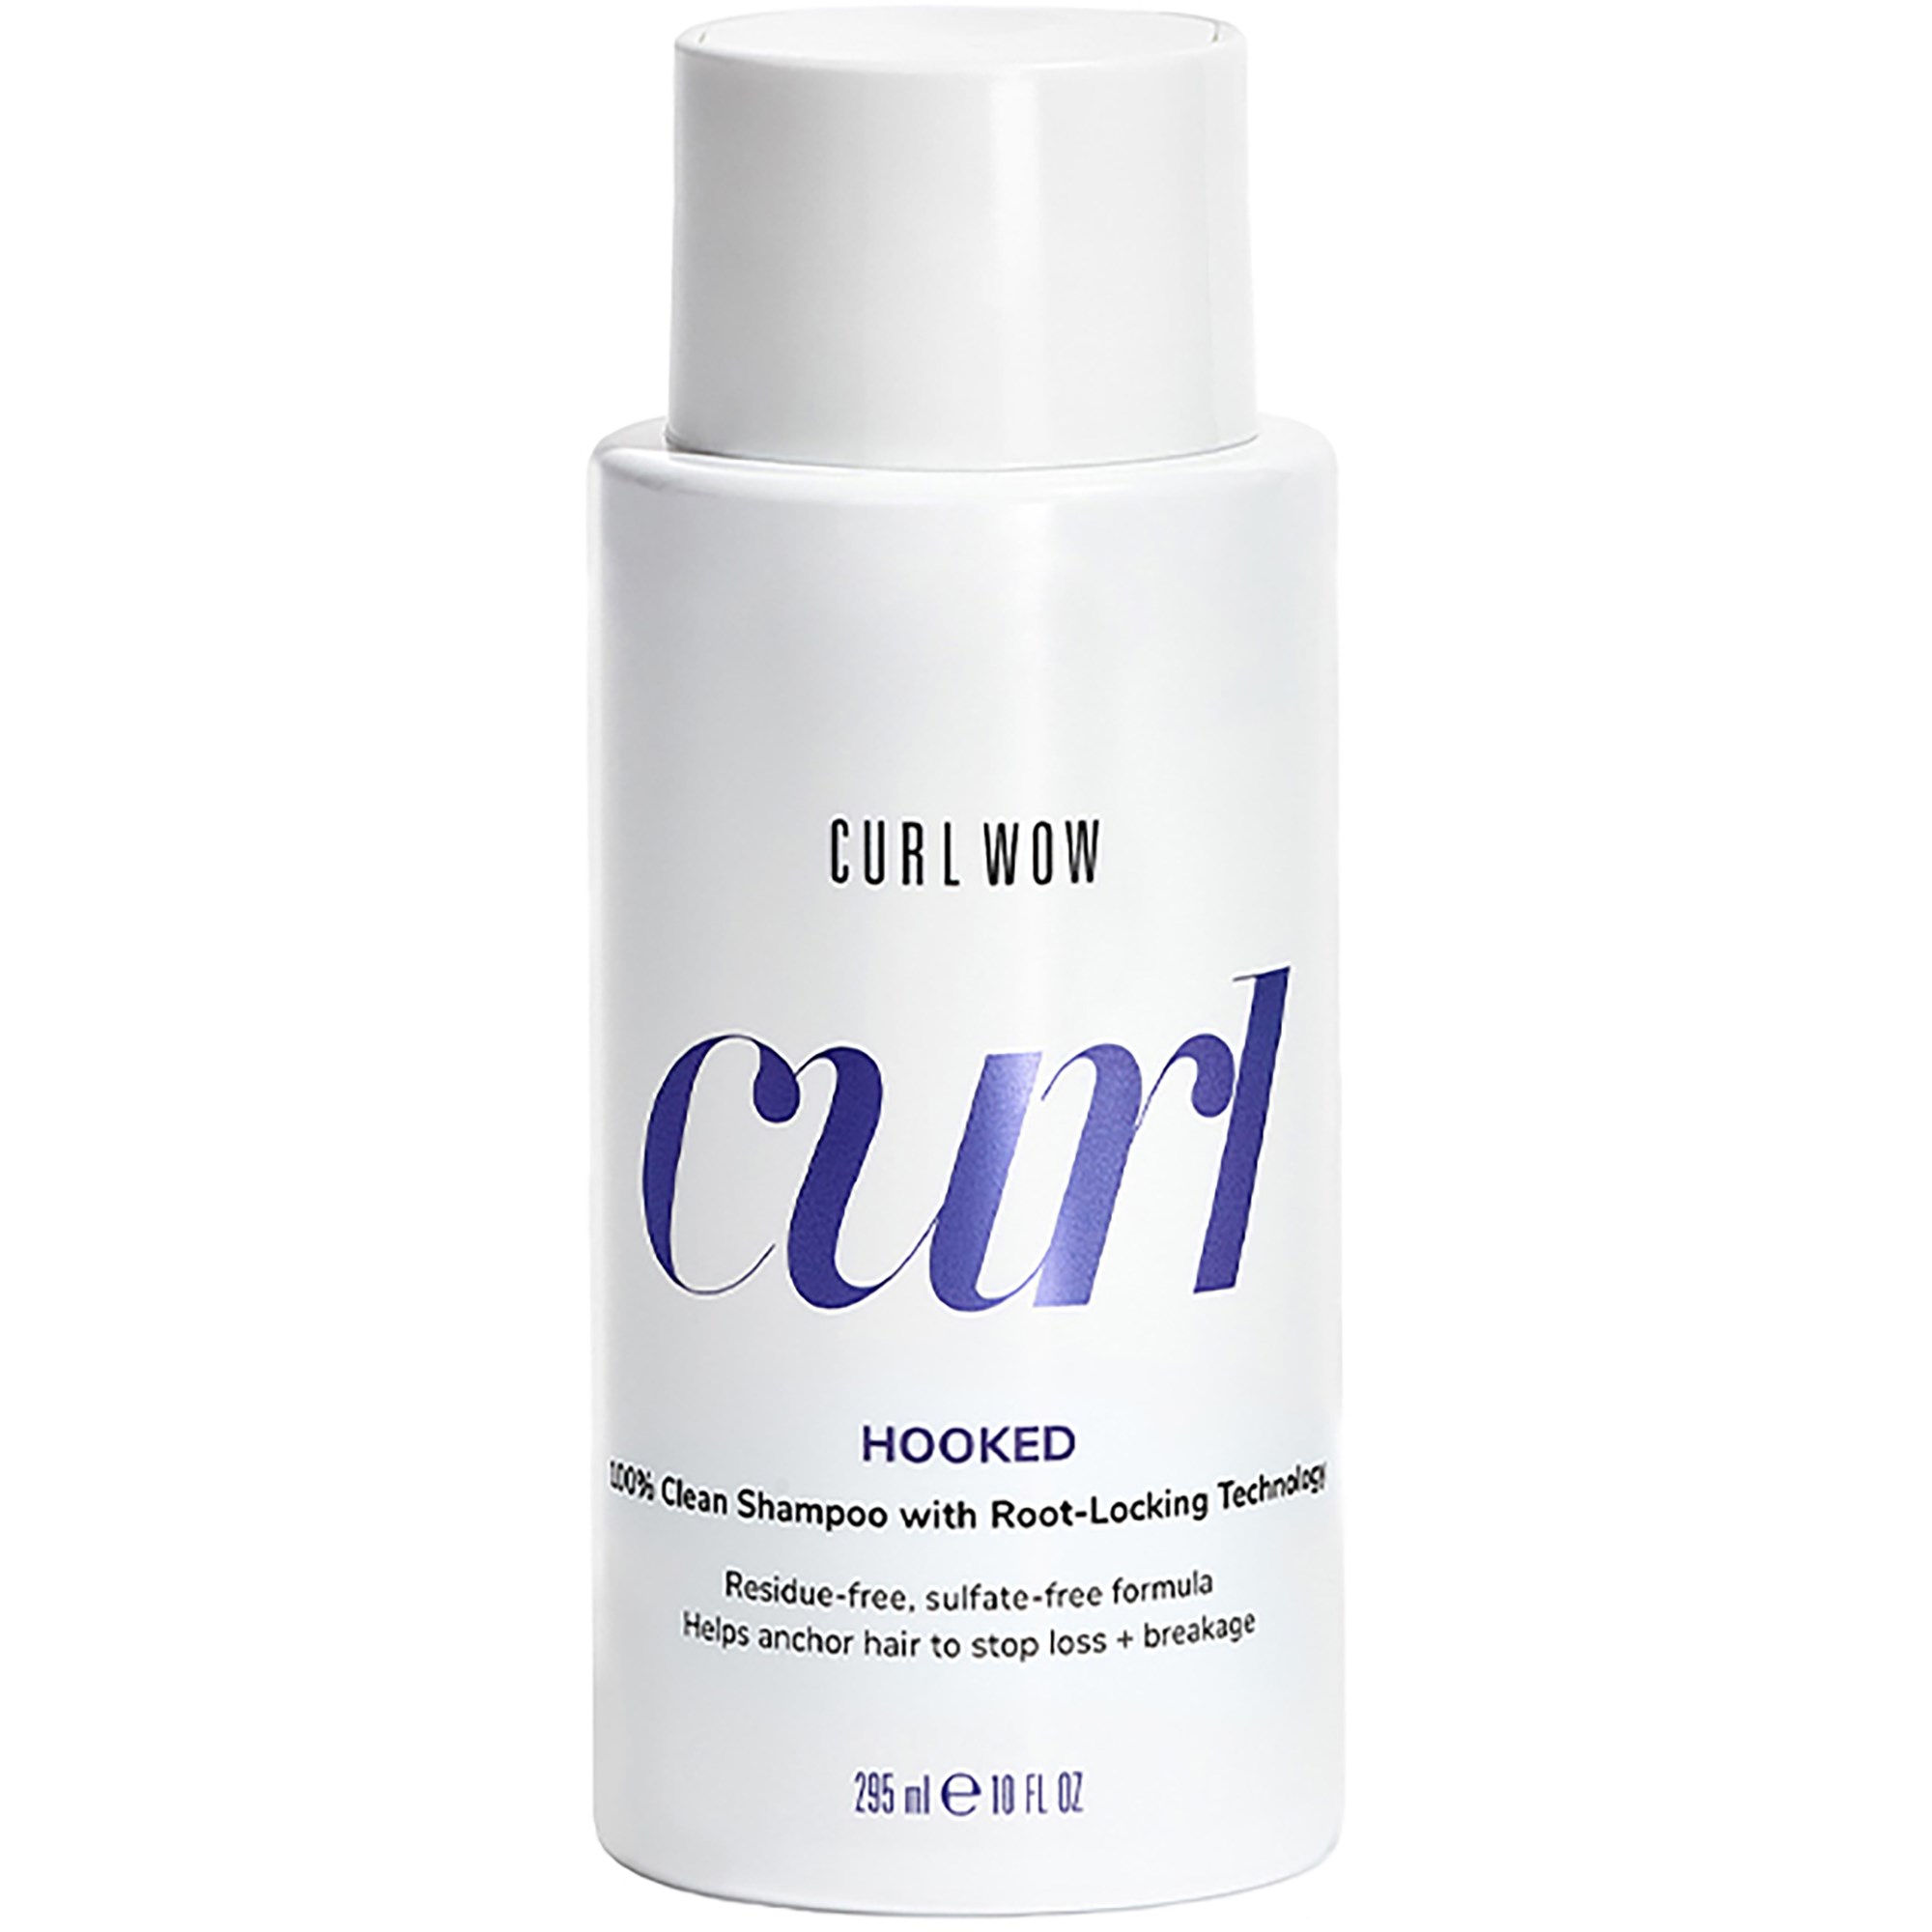 Läs mer om Color Wow Curl Curl Wow Hooked Shampoo 295 ml